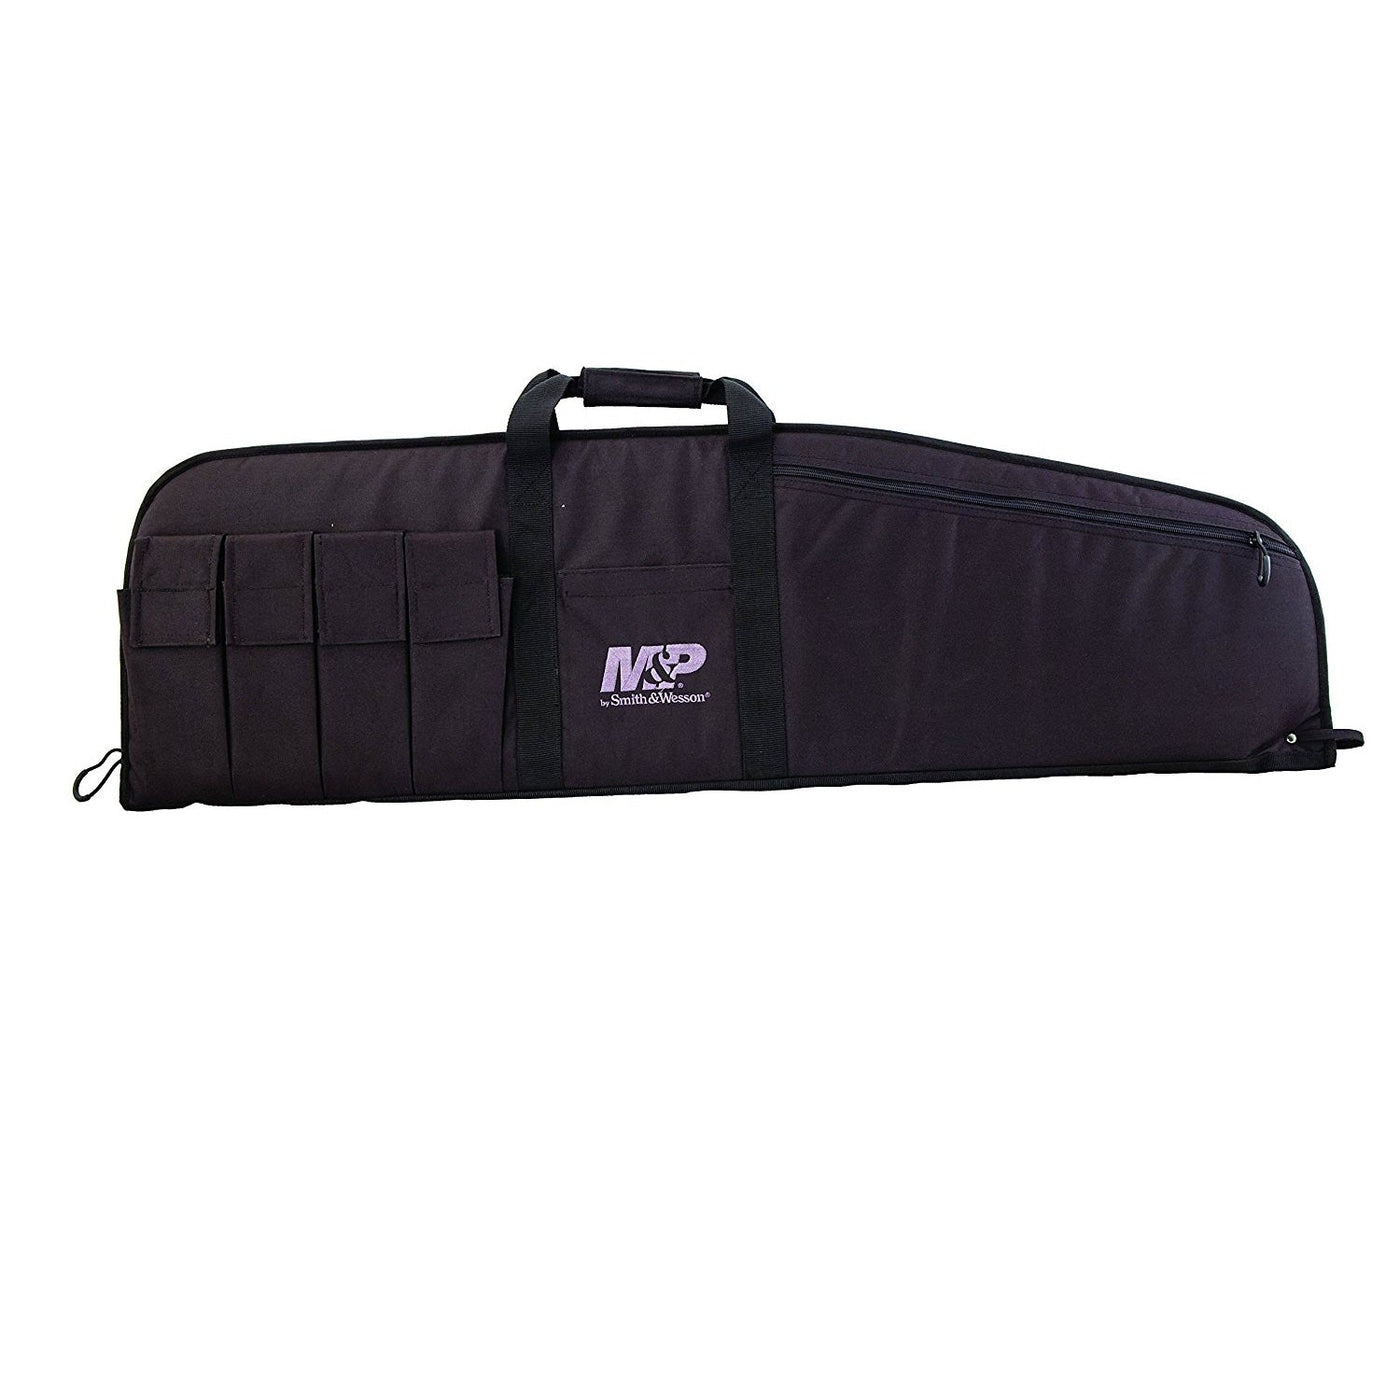 M&P by Smith & Wesson M&P Duty Series Gun Case 40in Shooting